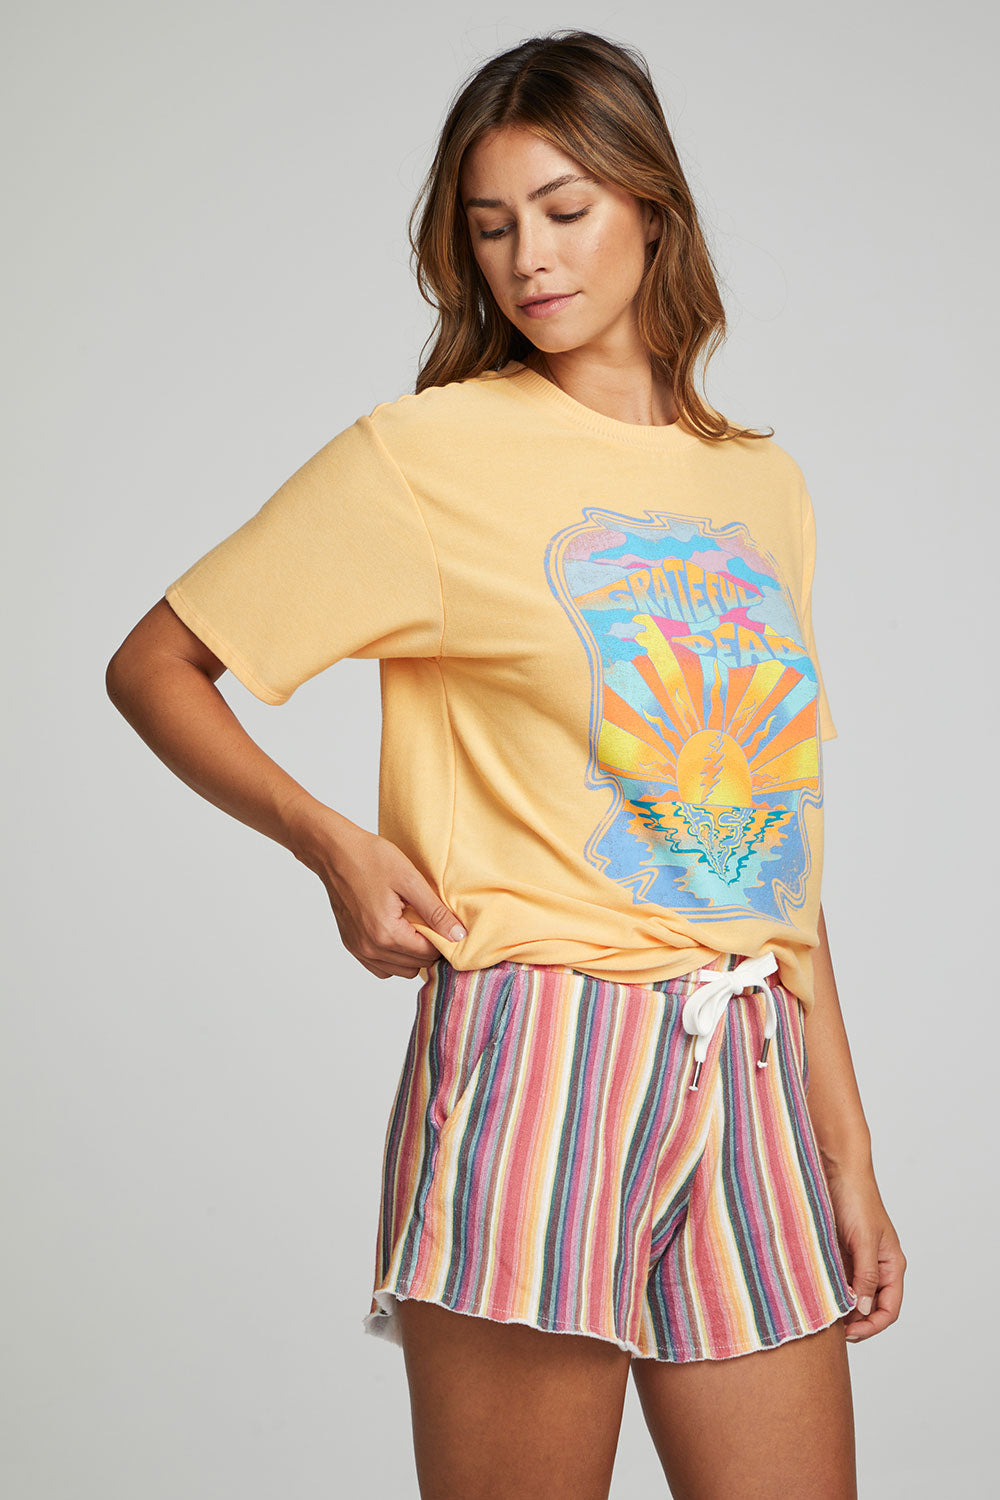 Grateful Dead - Sunset Rays WOMENS chaserbrand